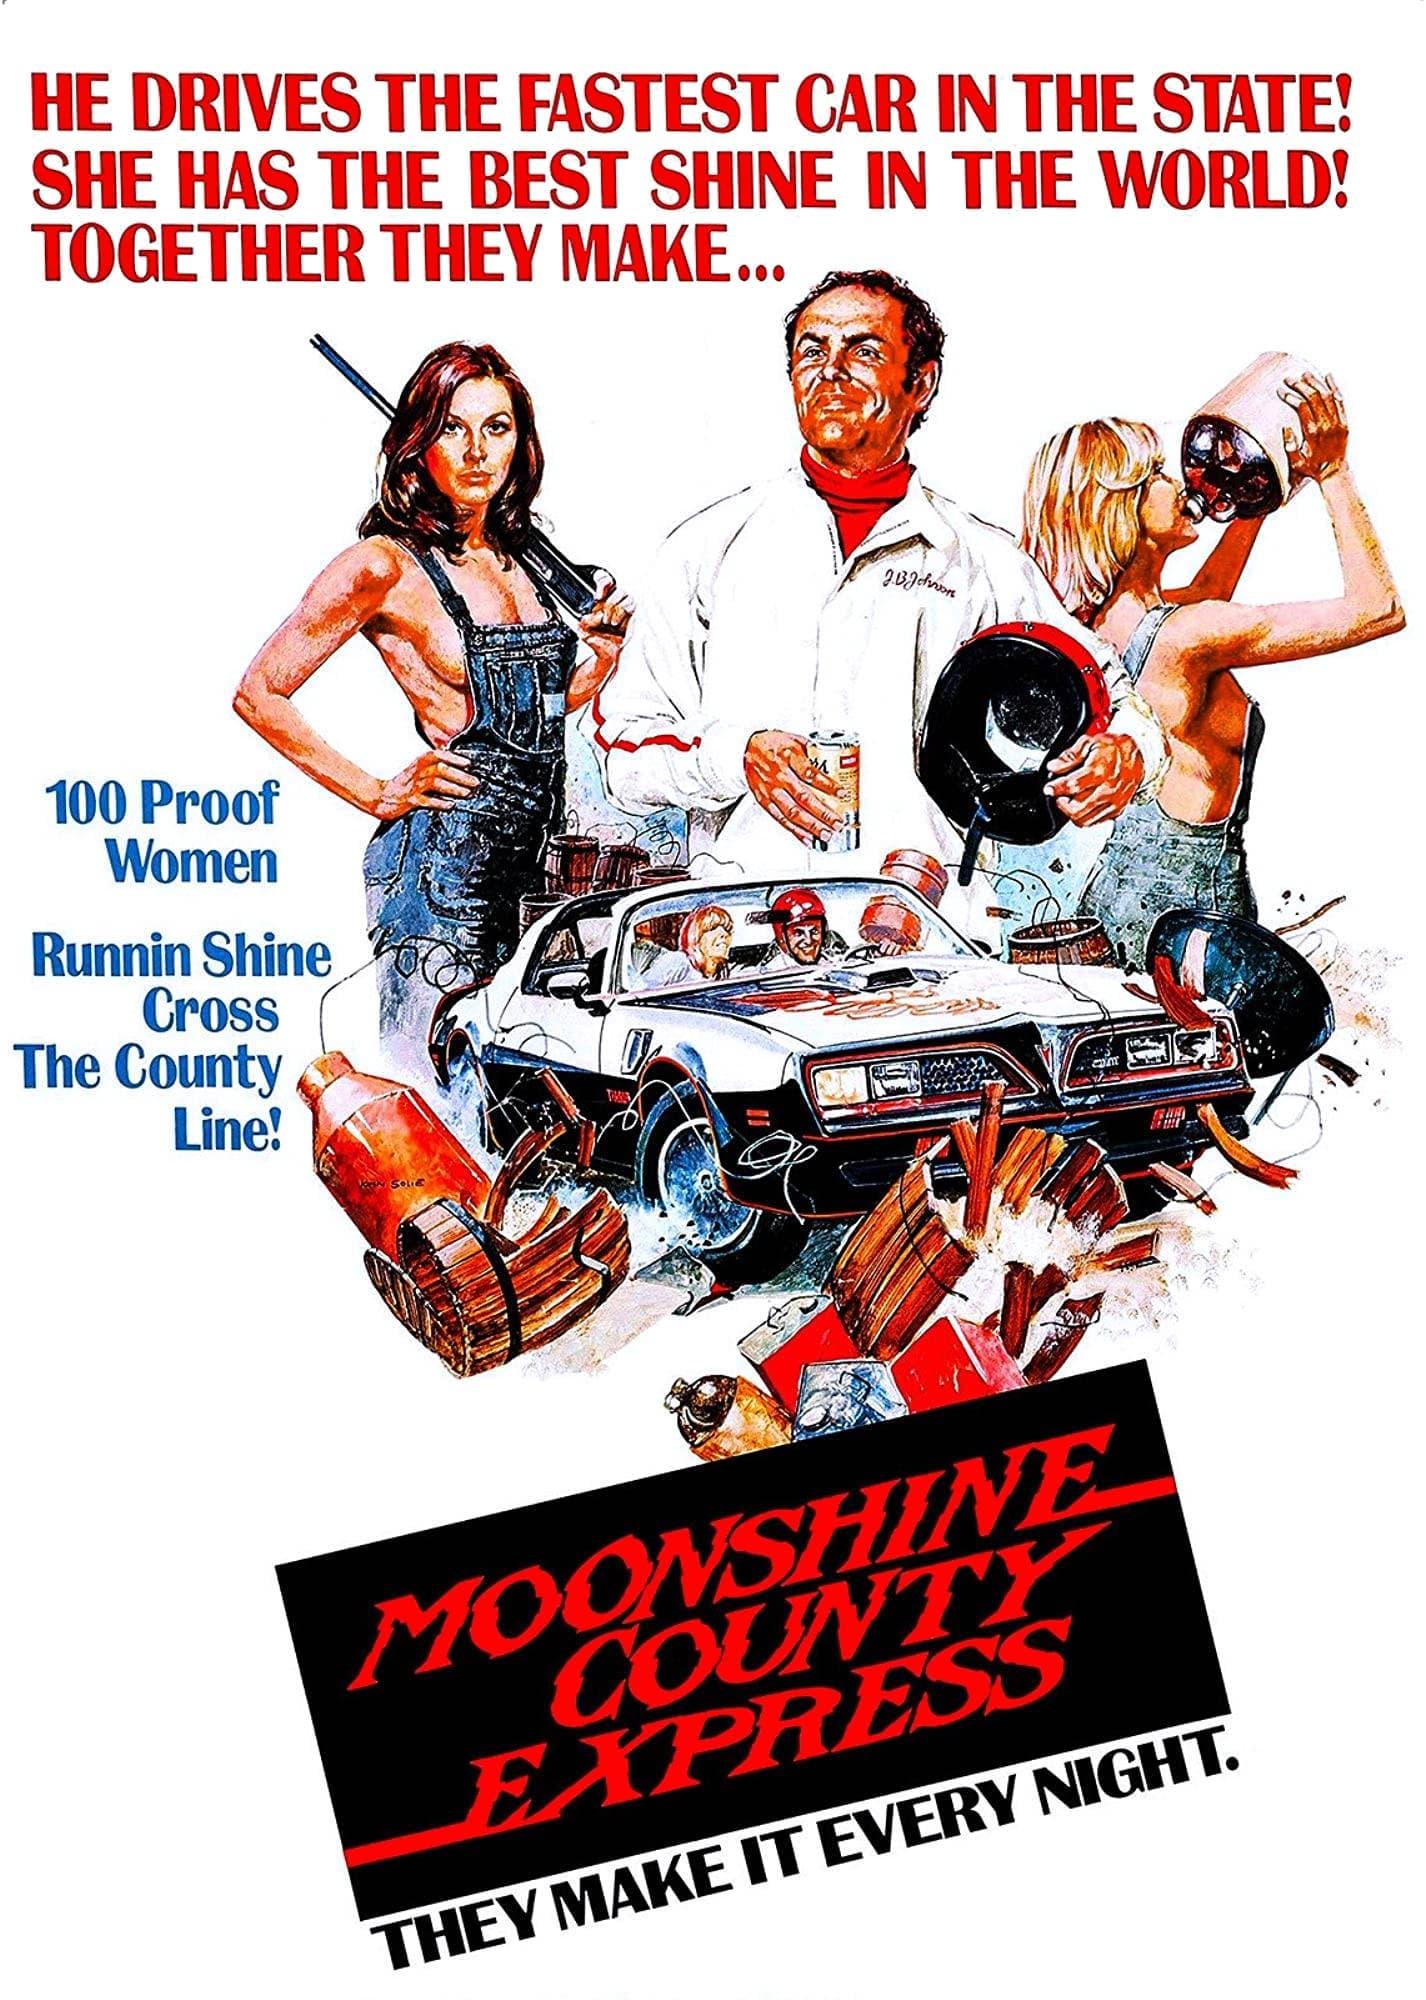 Moonshine County Express poster